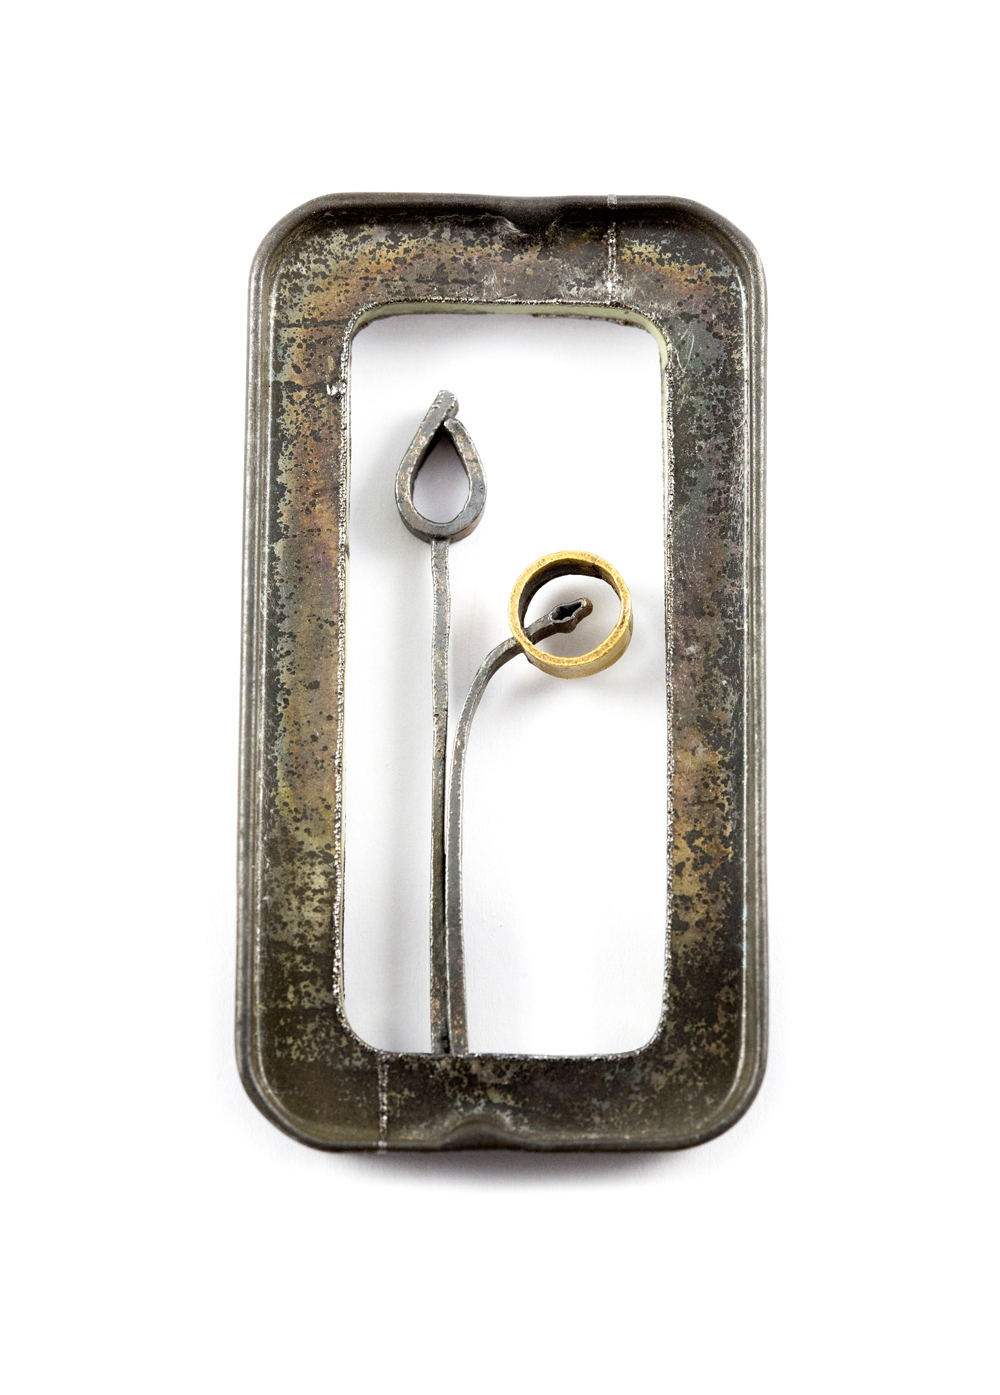 Jo Pond, Planted Frame Brooch, Repurposed steel tin, steel, silver, gold plate